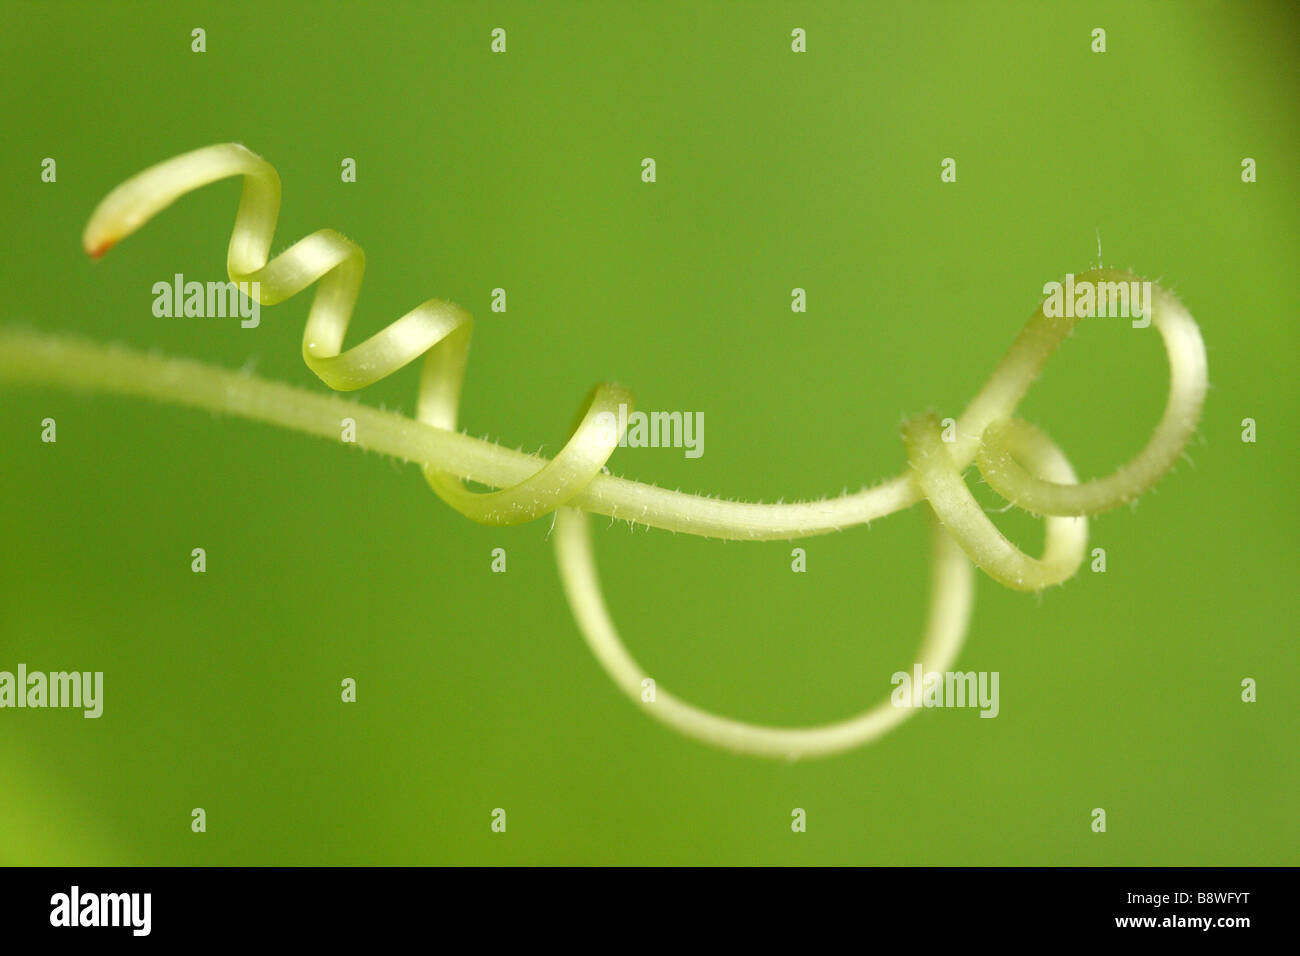 A tendril from a Zucchini Vine Stock Photo